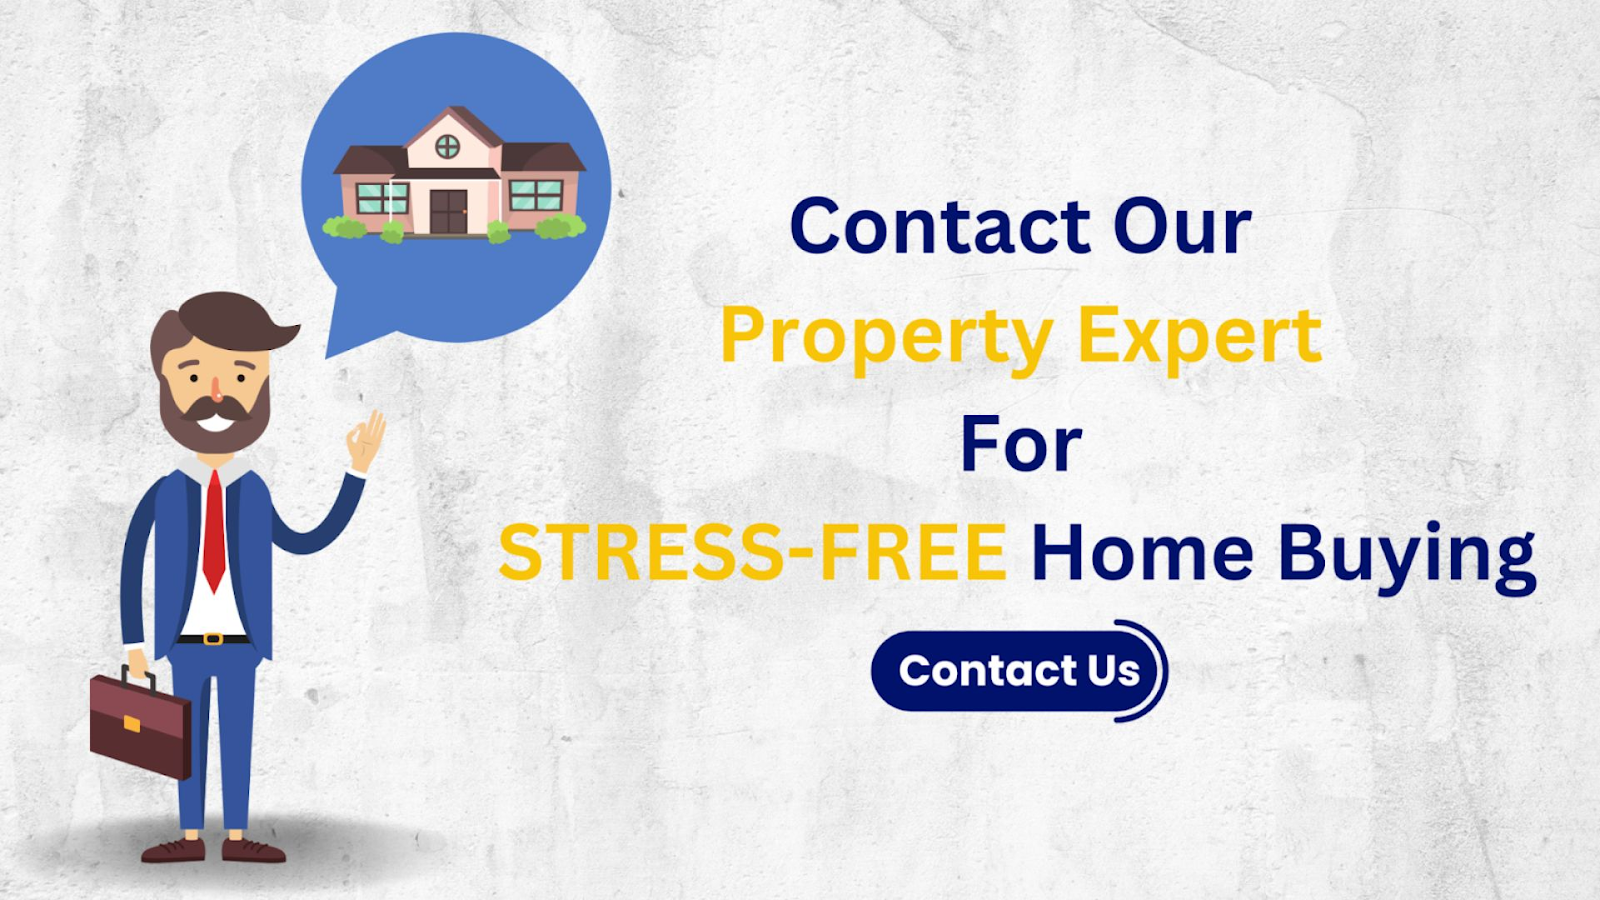 Contact a real estate specialist at PropertyCloud for a hassle-free home purchase.